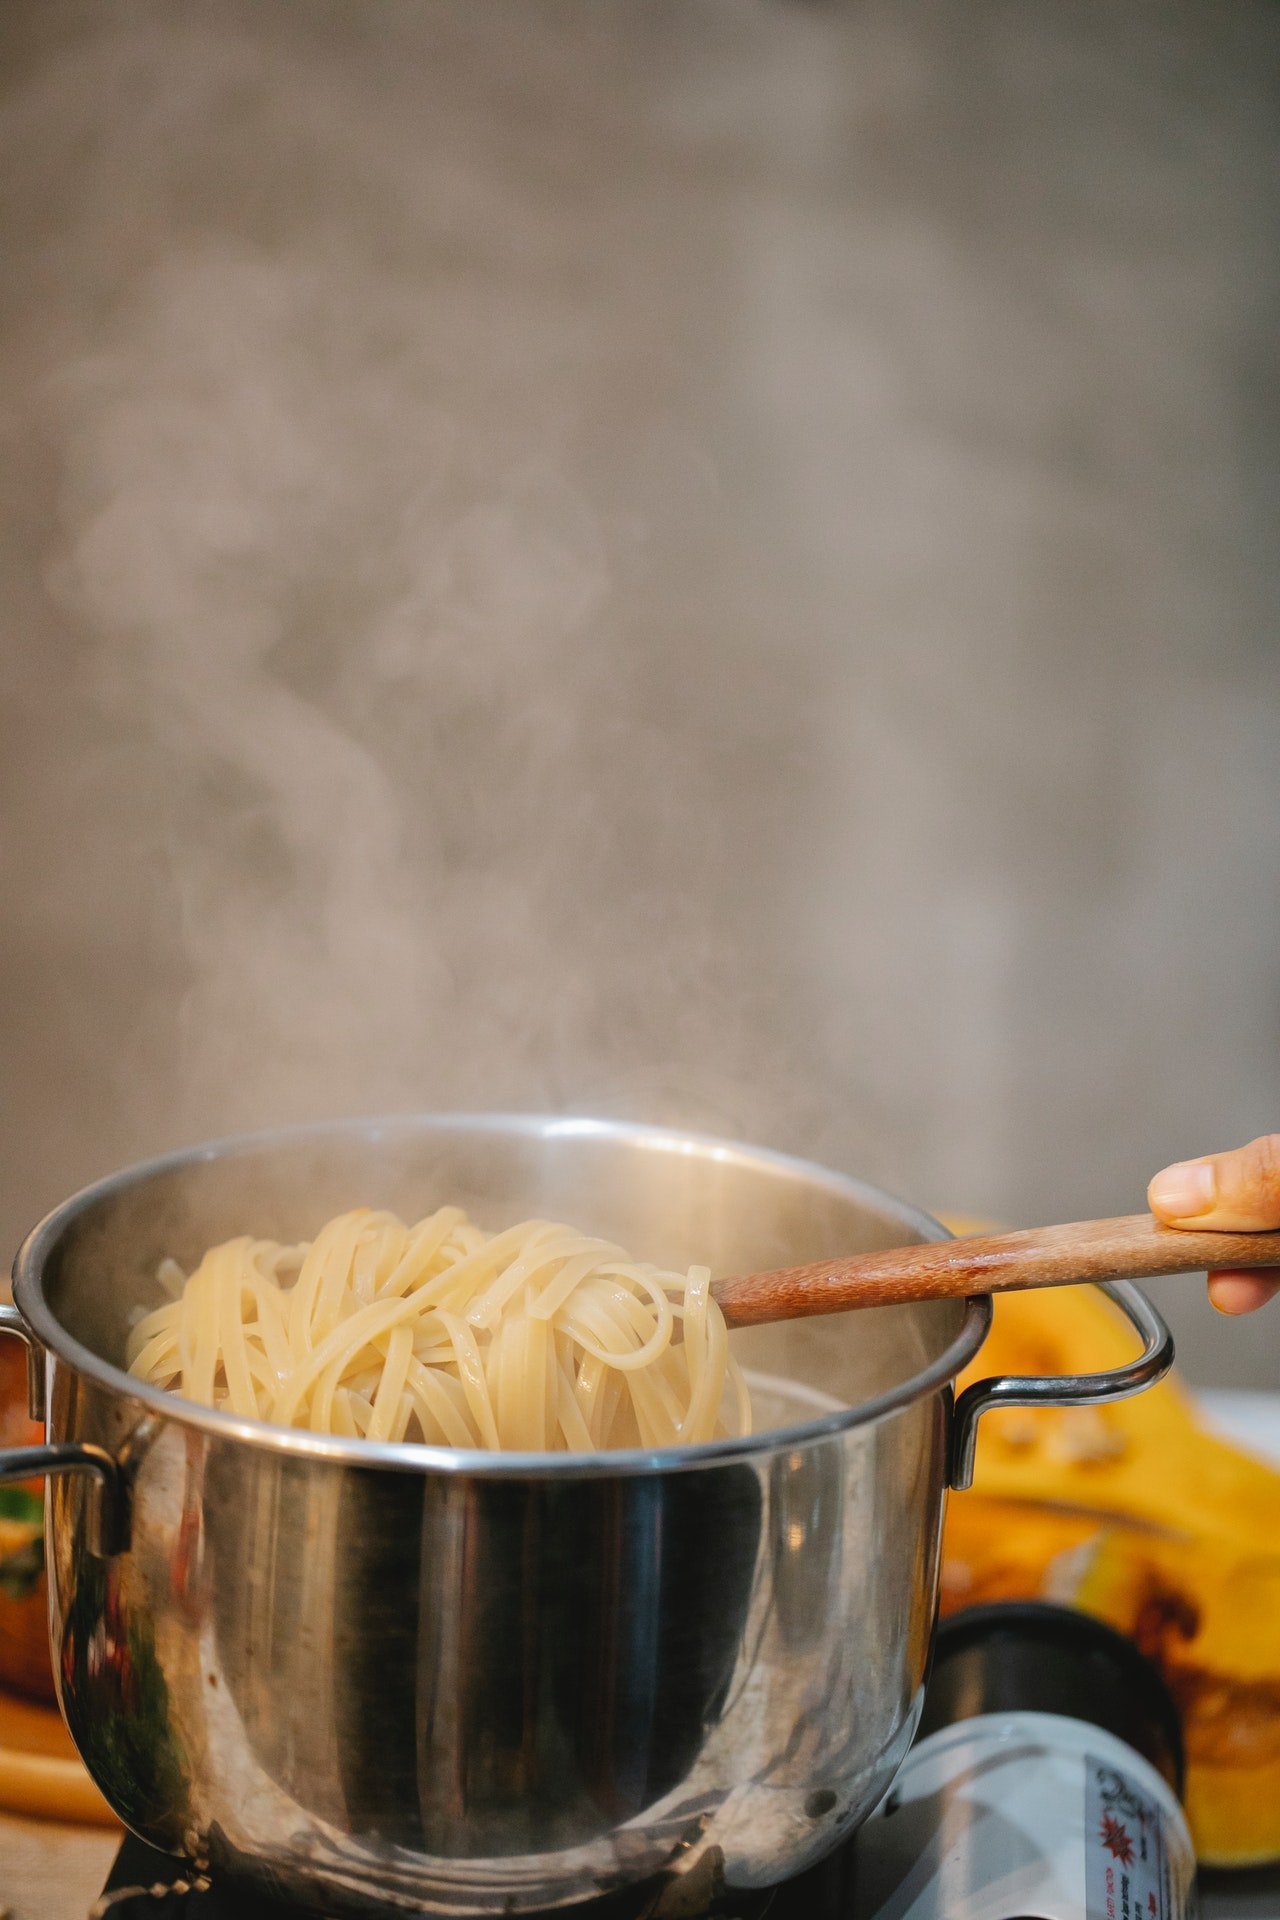 They heard a clang from the kitchen and realized Josh had hurt himself with the boiling pasta water. | Source: Pexels